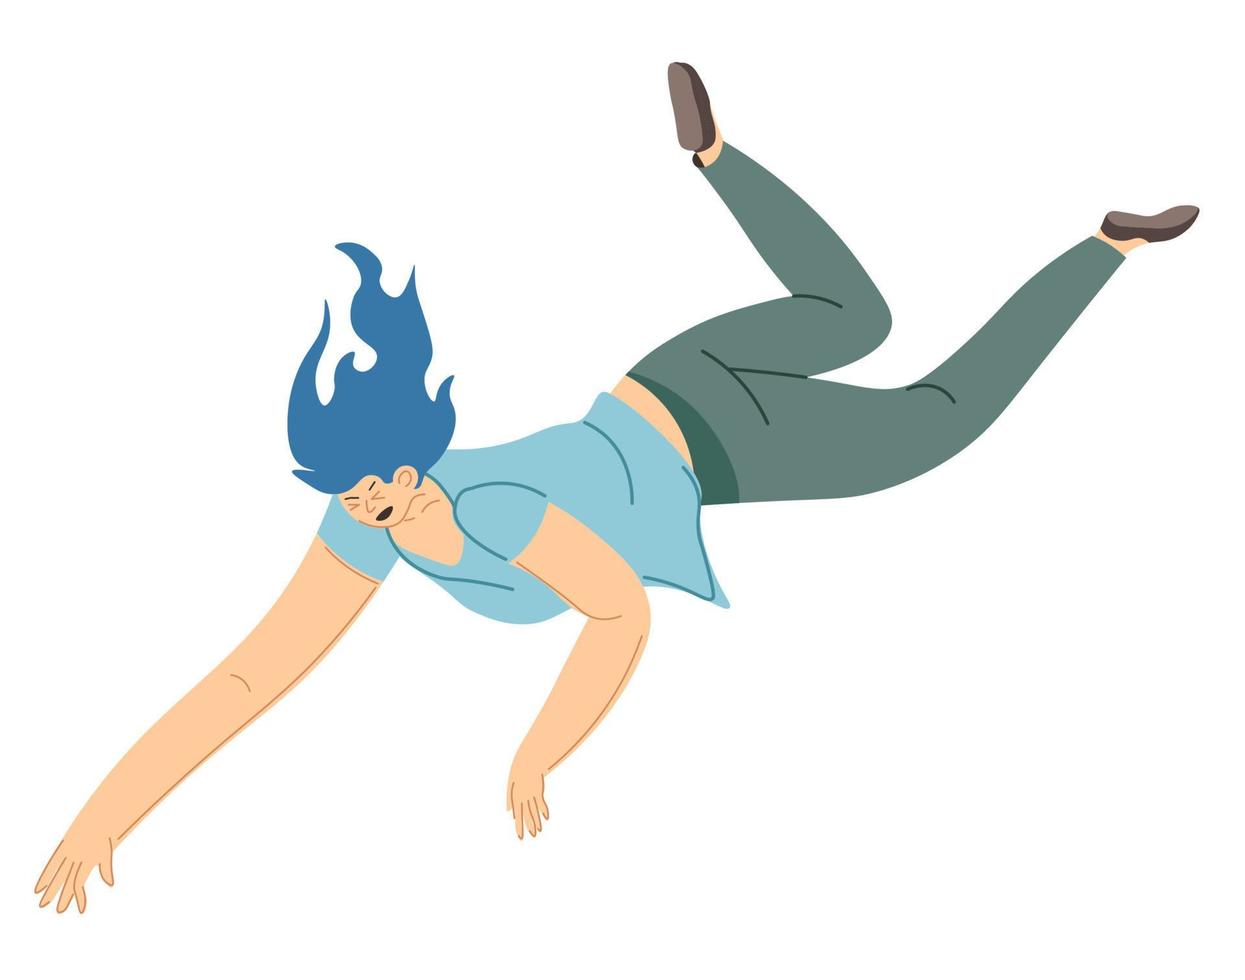 Woman falling down and crying, unexpected accident vector